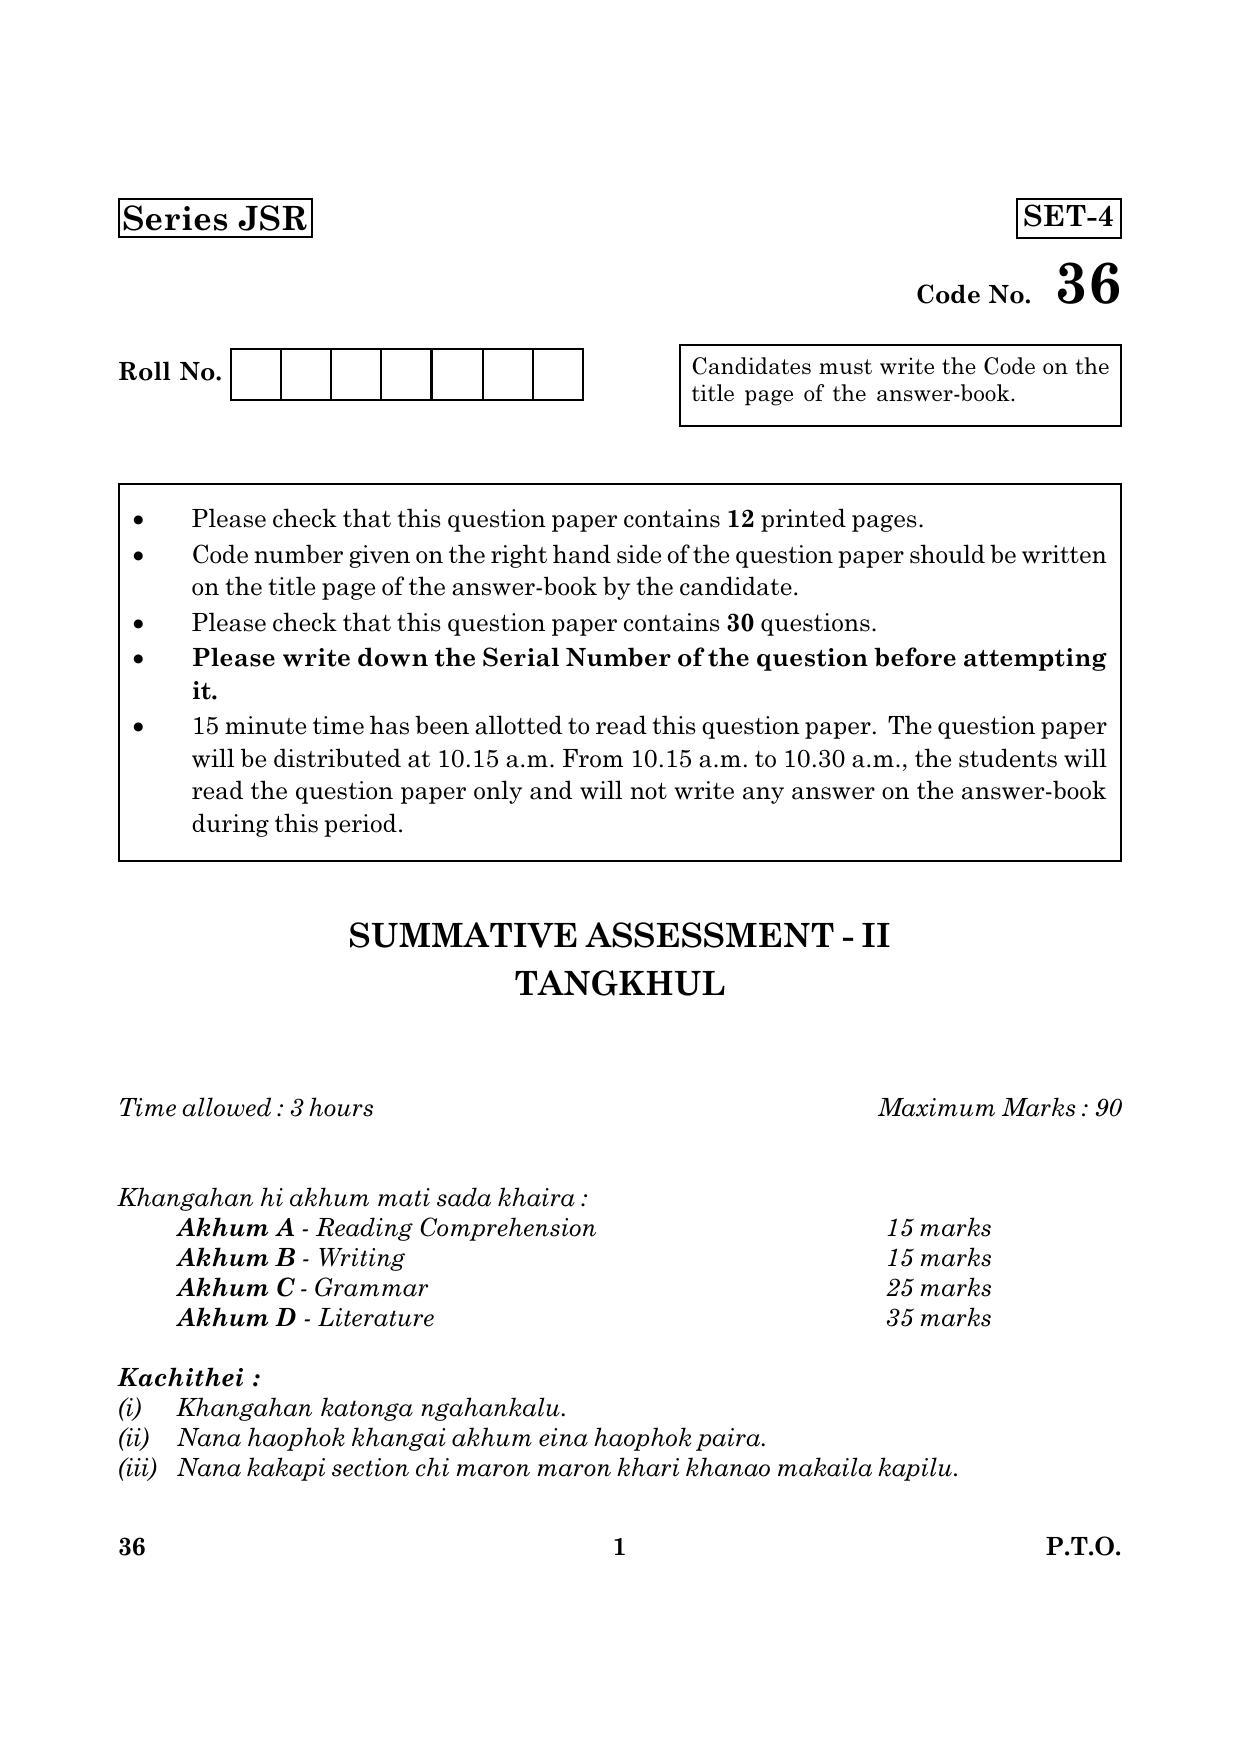 CBSE Class 10 036 Tangkhul (English) 2016 Question Paper - Page 1